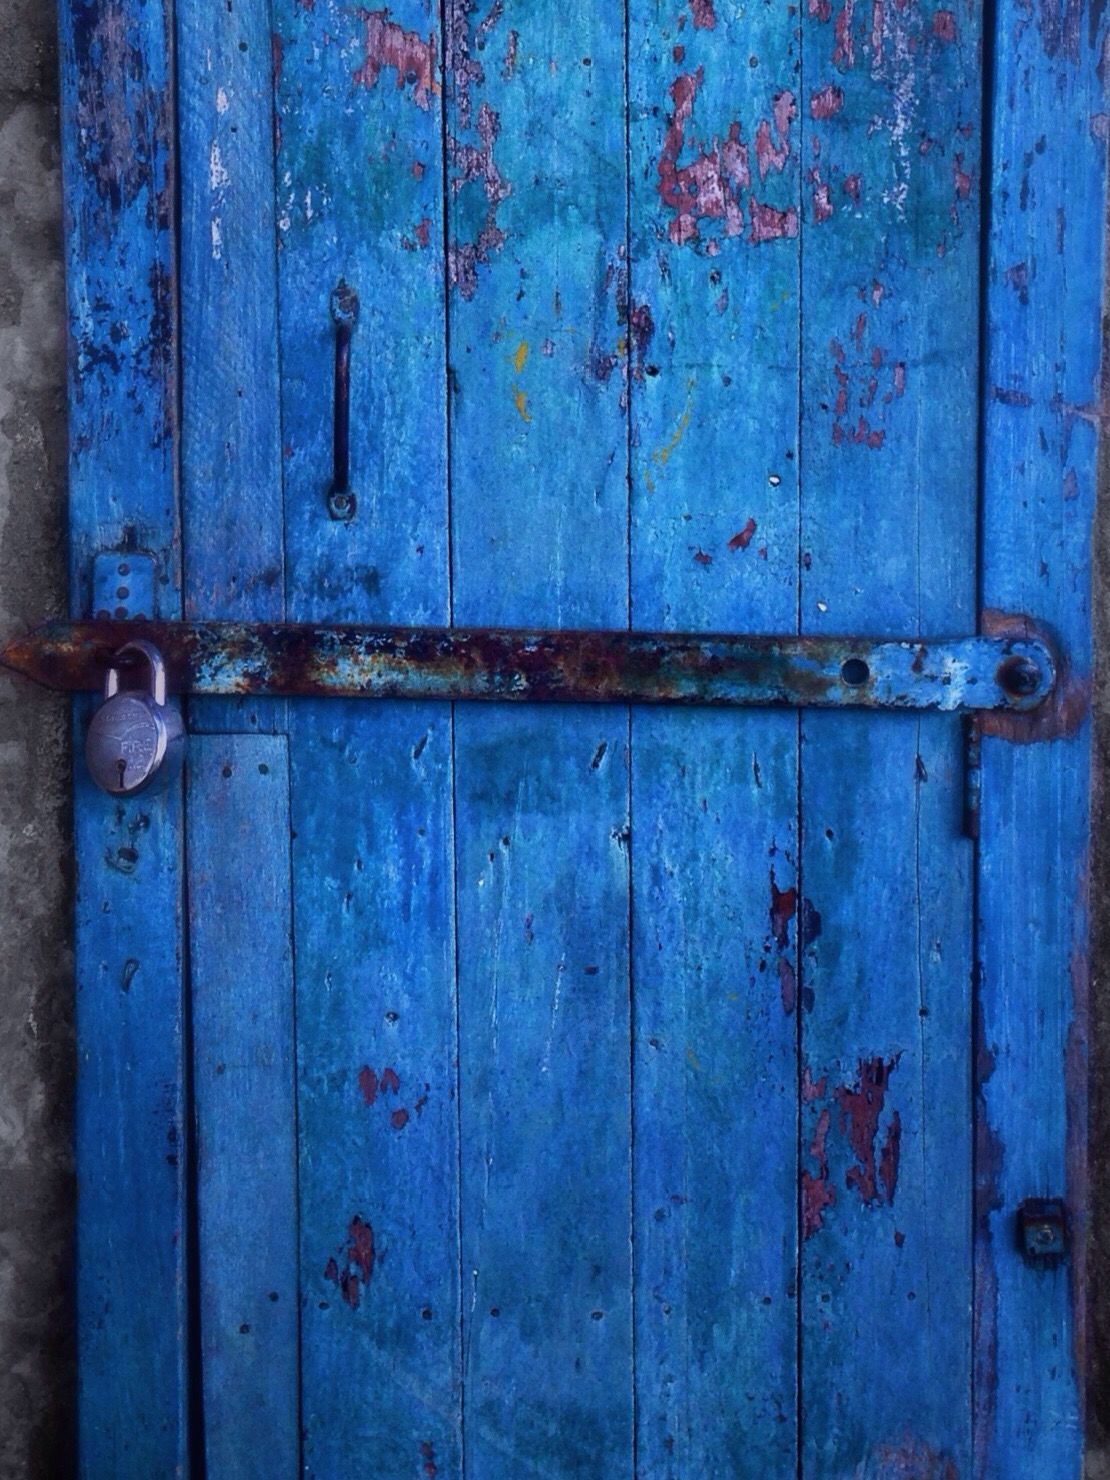 door, wood - material, full frame, weathered, wooden, closed, backgrounds, metal, old, safety, protection, security, blue, rusty, close-up, wood, built structure, textured, lock, deterioration